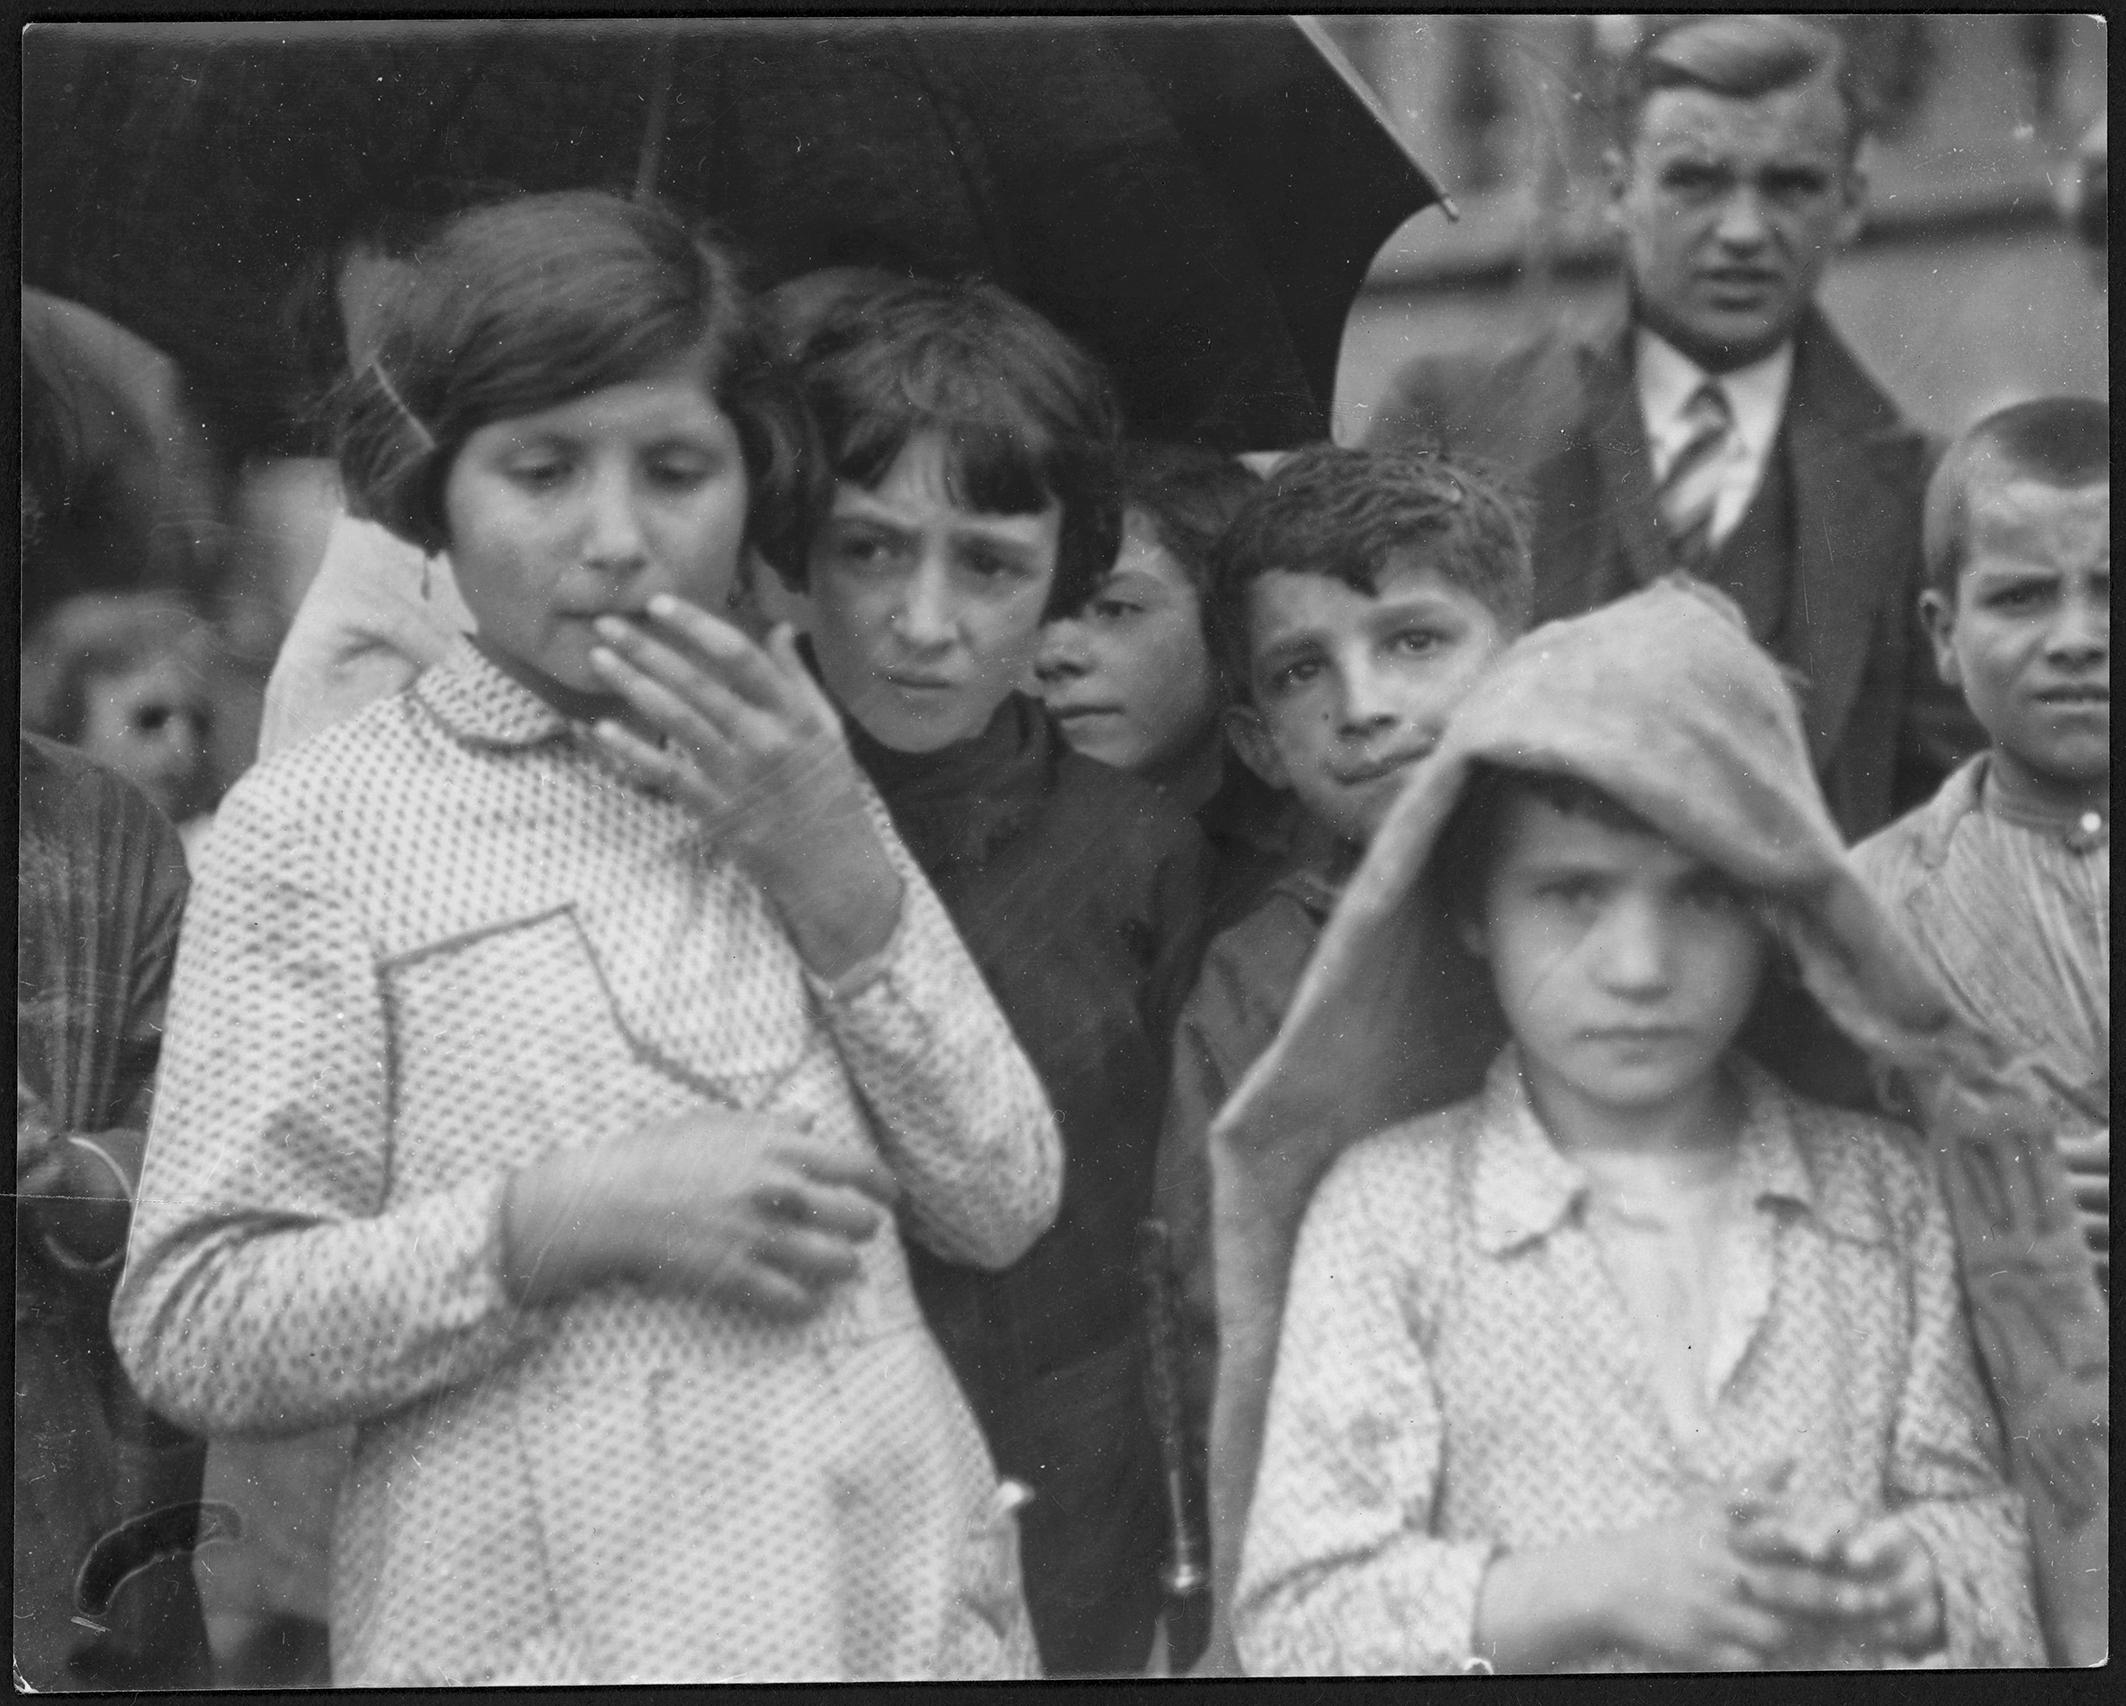 Black and white portrait of a young girl with a young boy in the foreground of a group of children